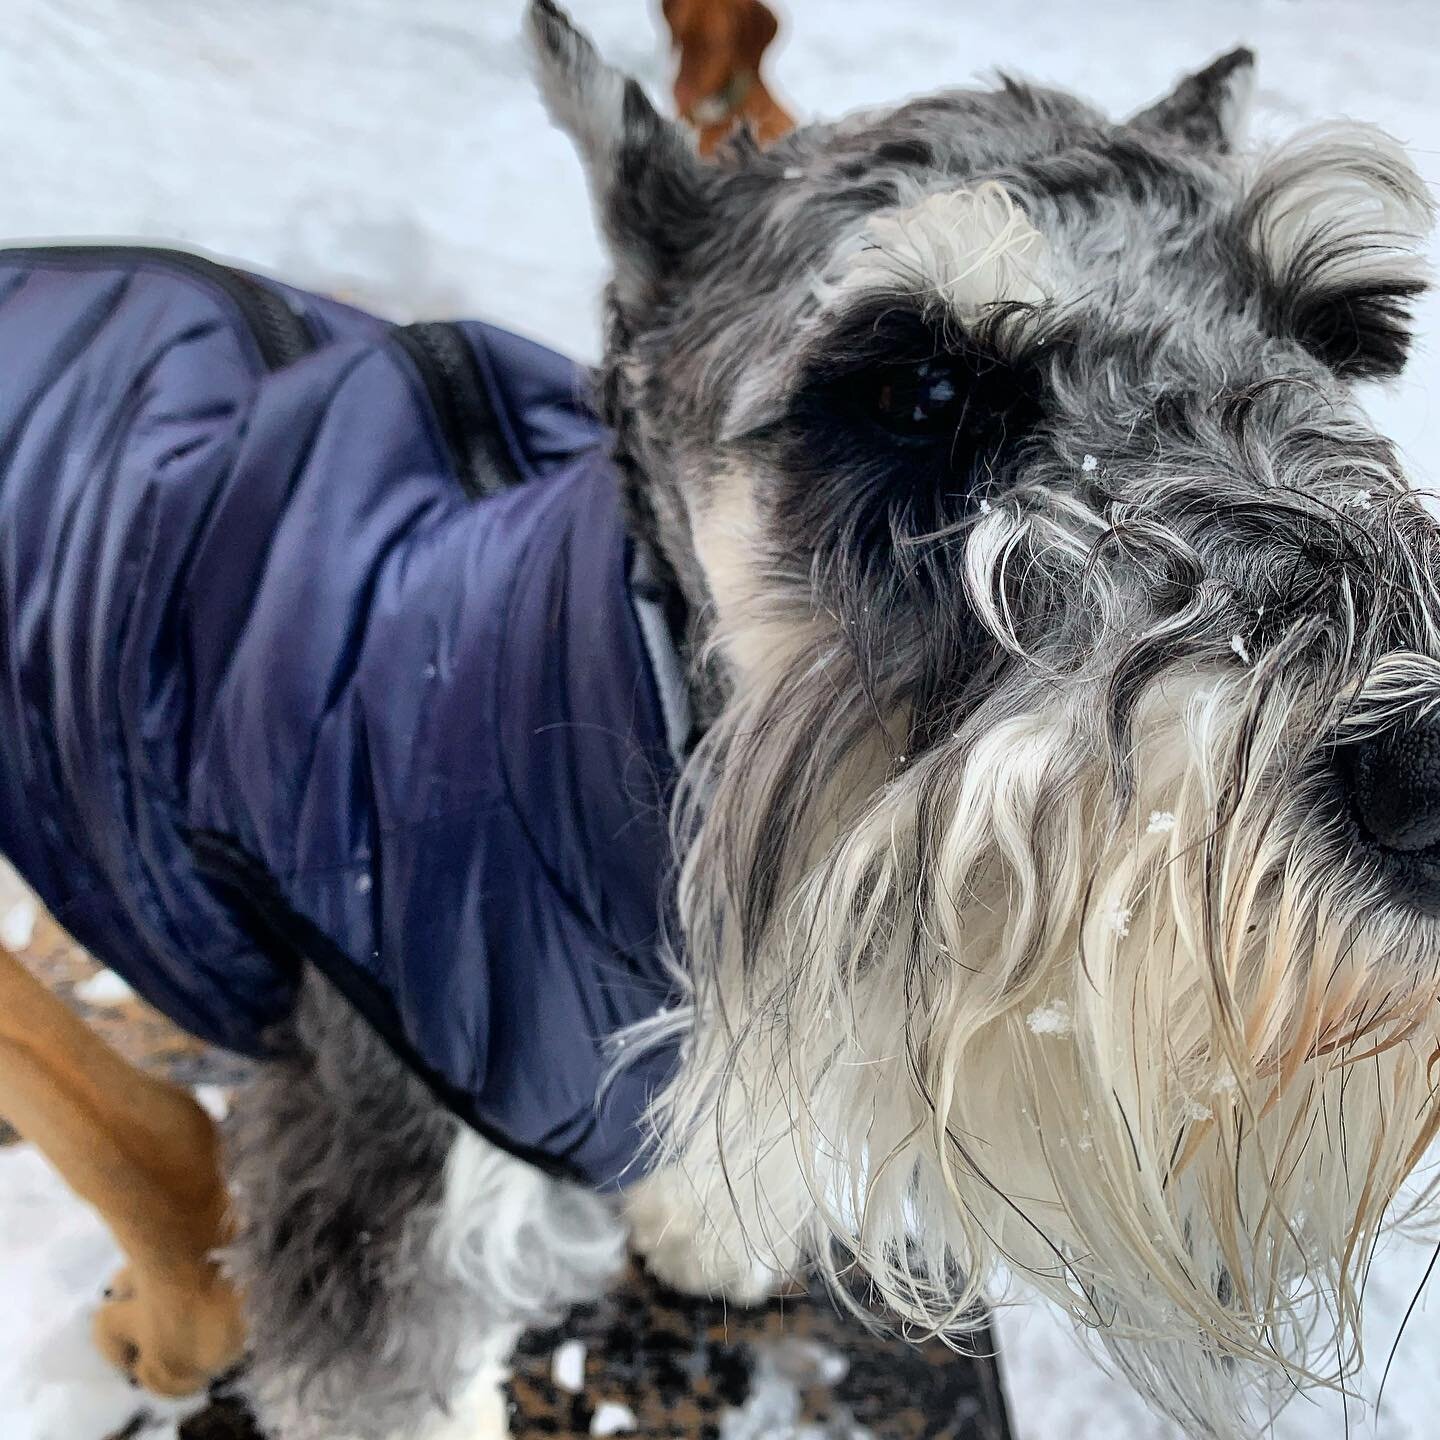 Jaeger is staying warm in one of our new jackets today!  #dogcoats #steamboatdigsdogs #steamboatdogs #peacelovepetcare #schnauzersofinstagram